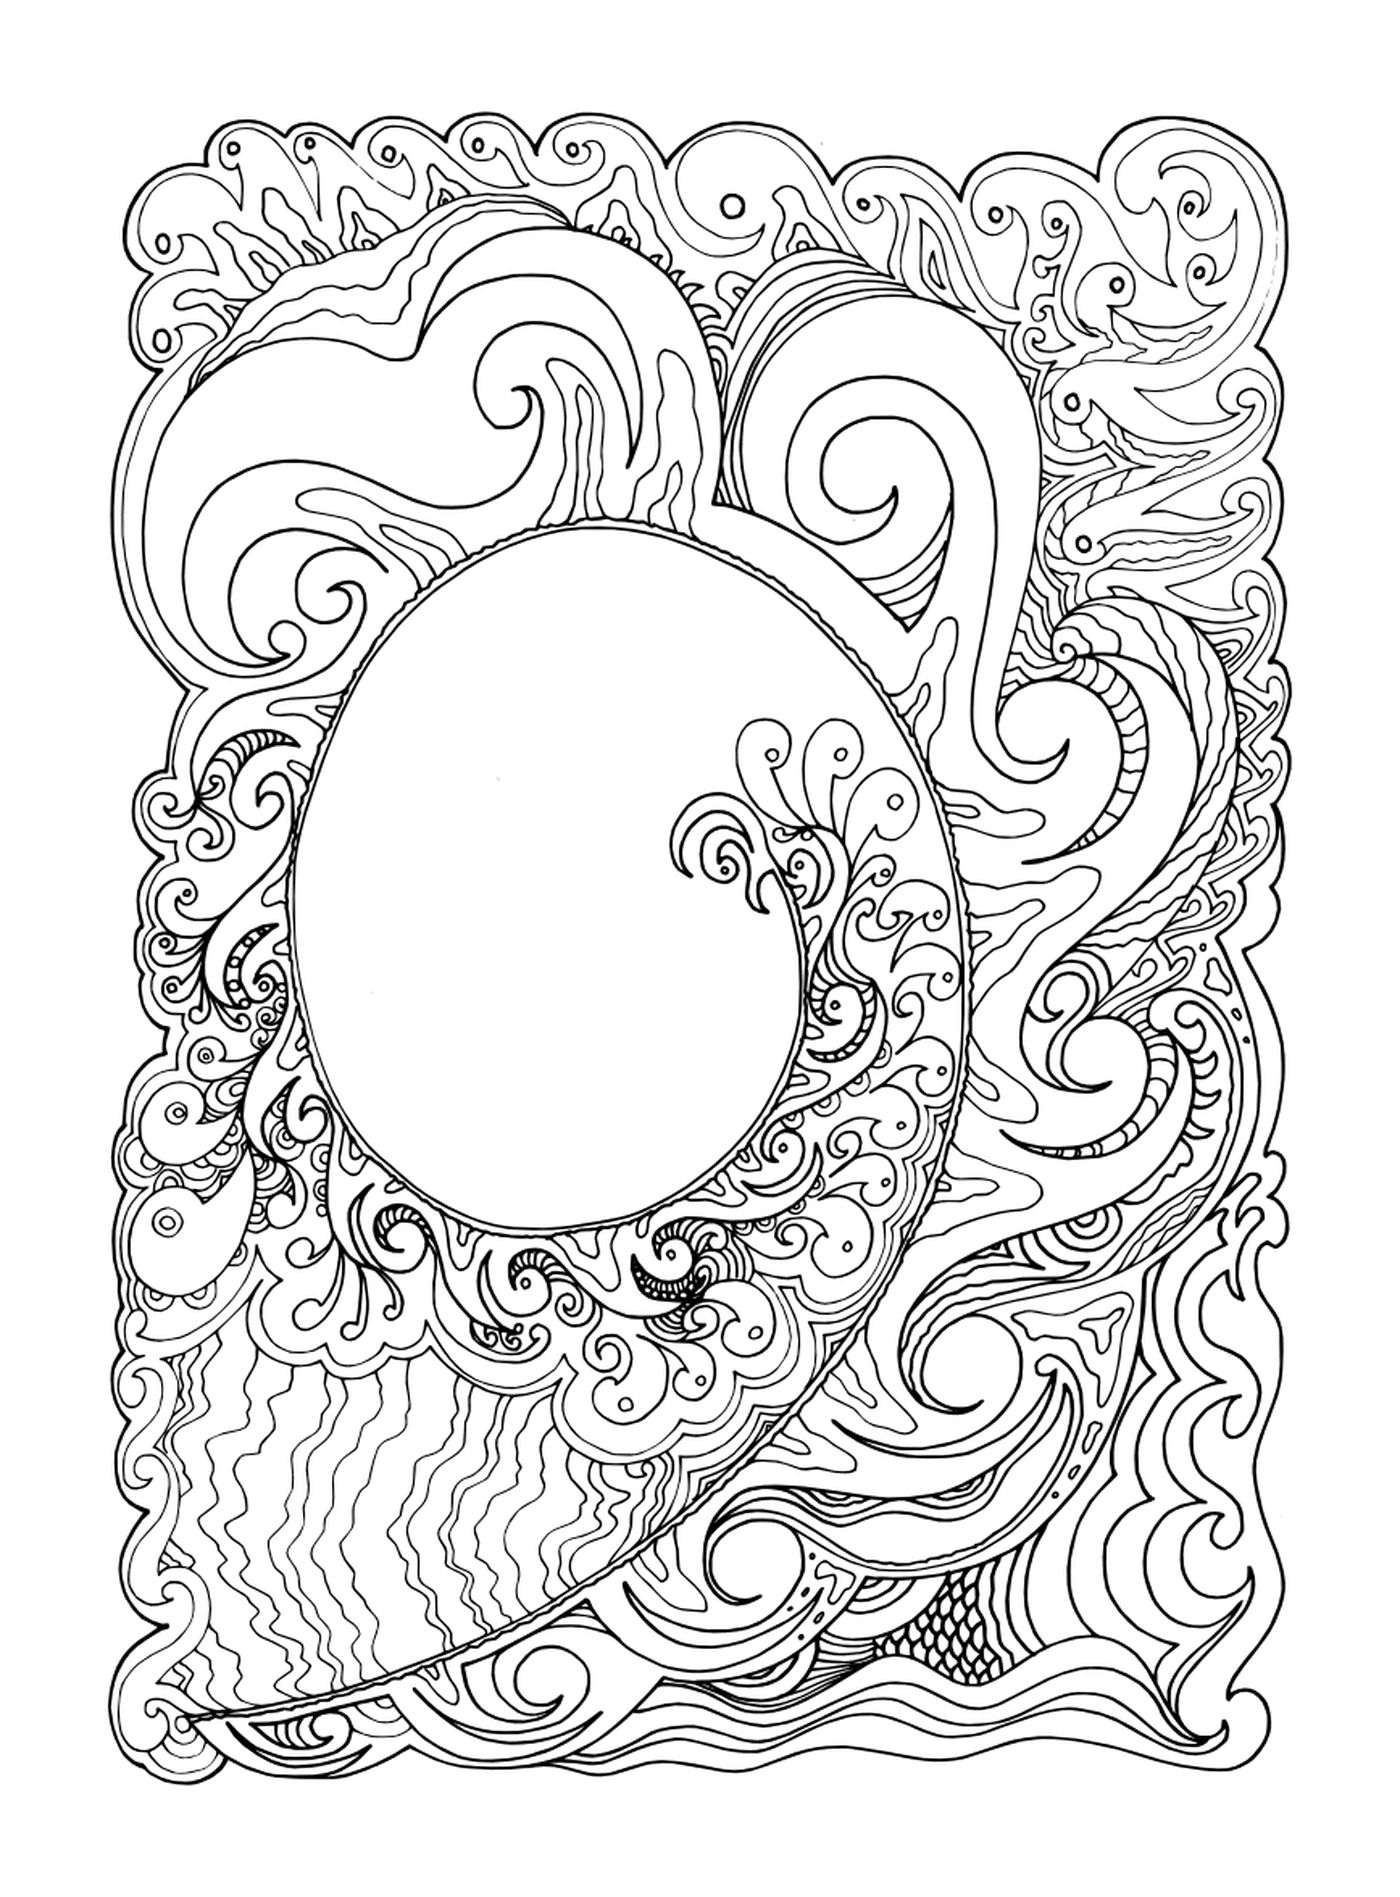  An oval frame with swirling patterns 